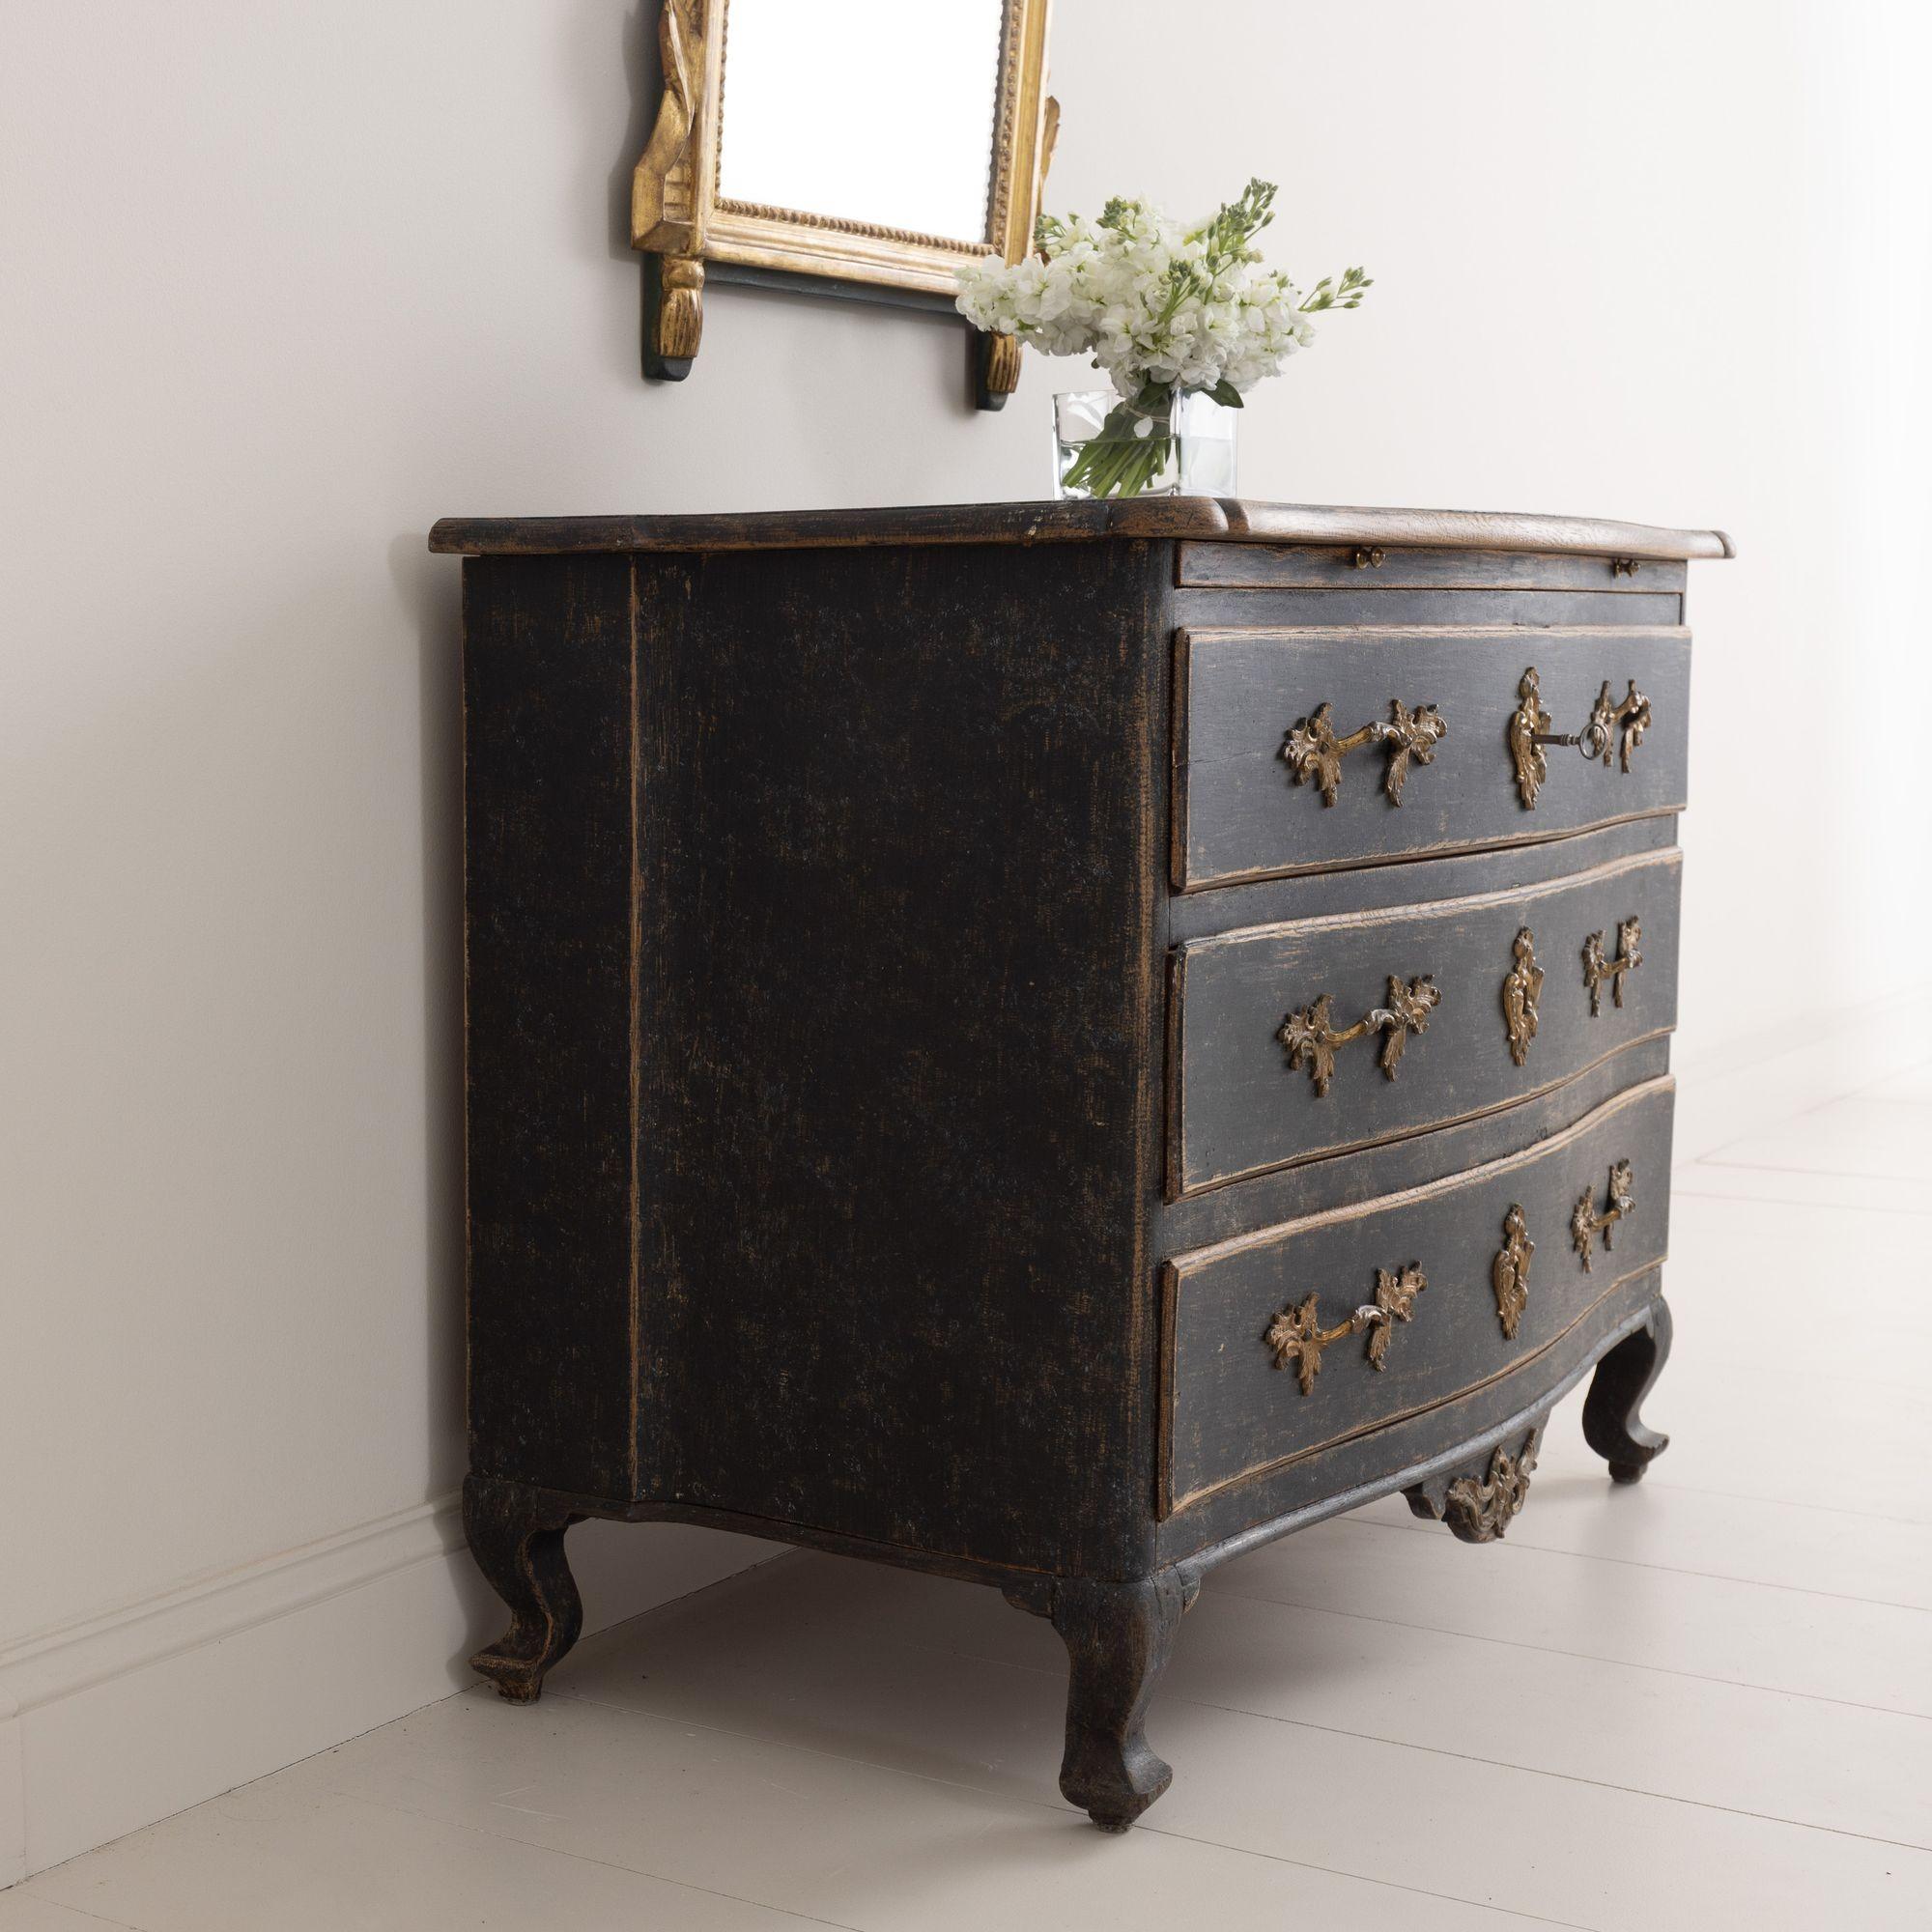 18th C. Swedish Rococo Period Black Painted Commode with Original Brass Hardware For Sale 7